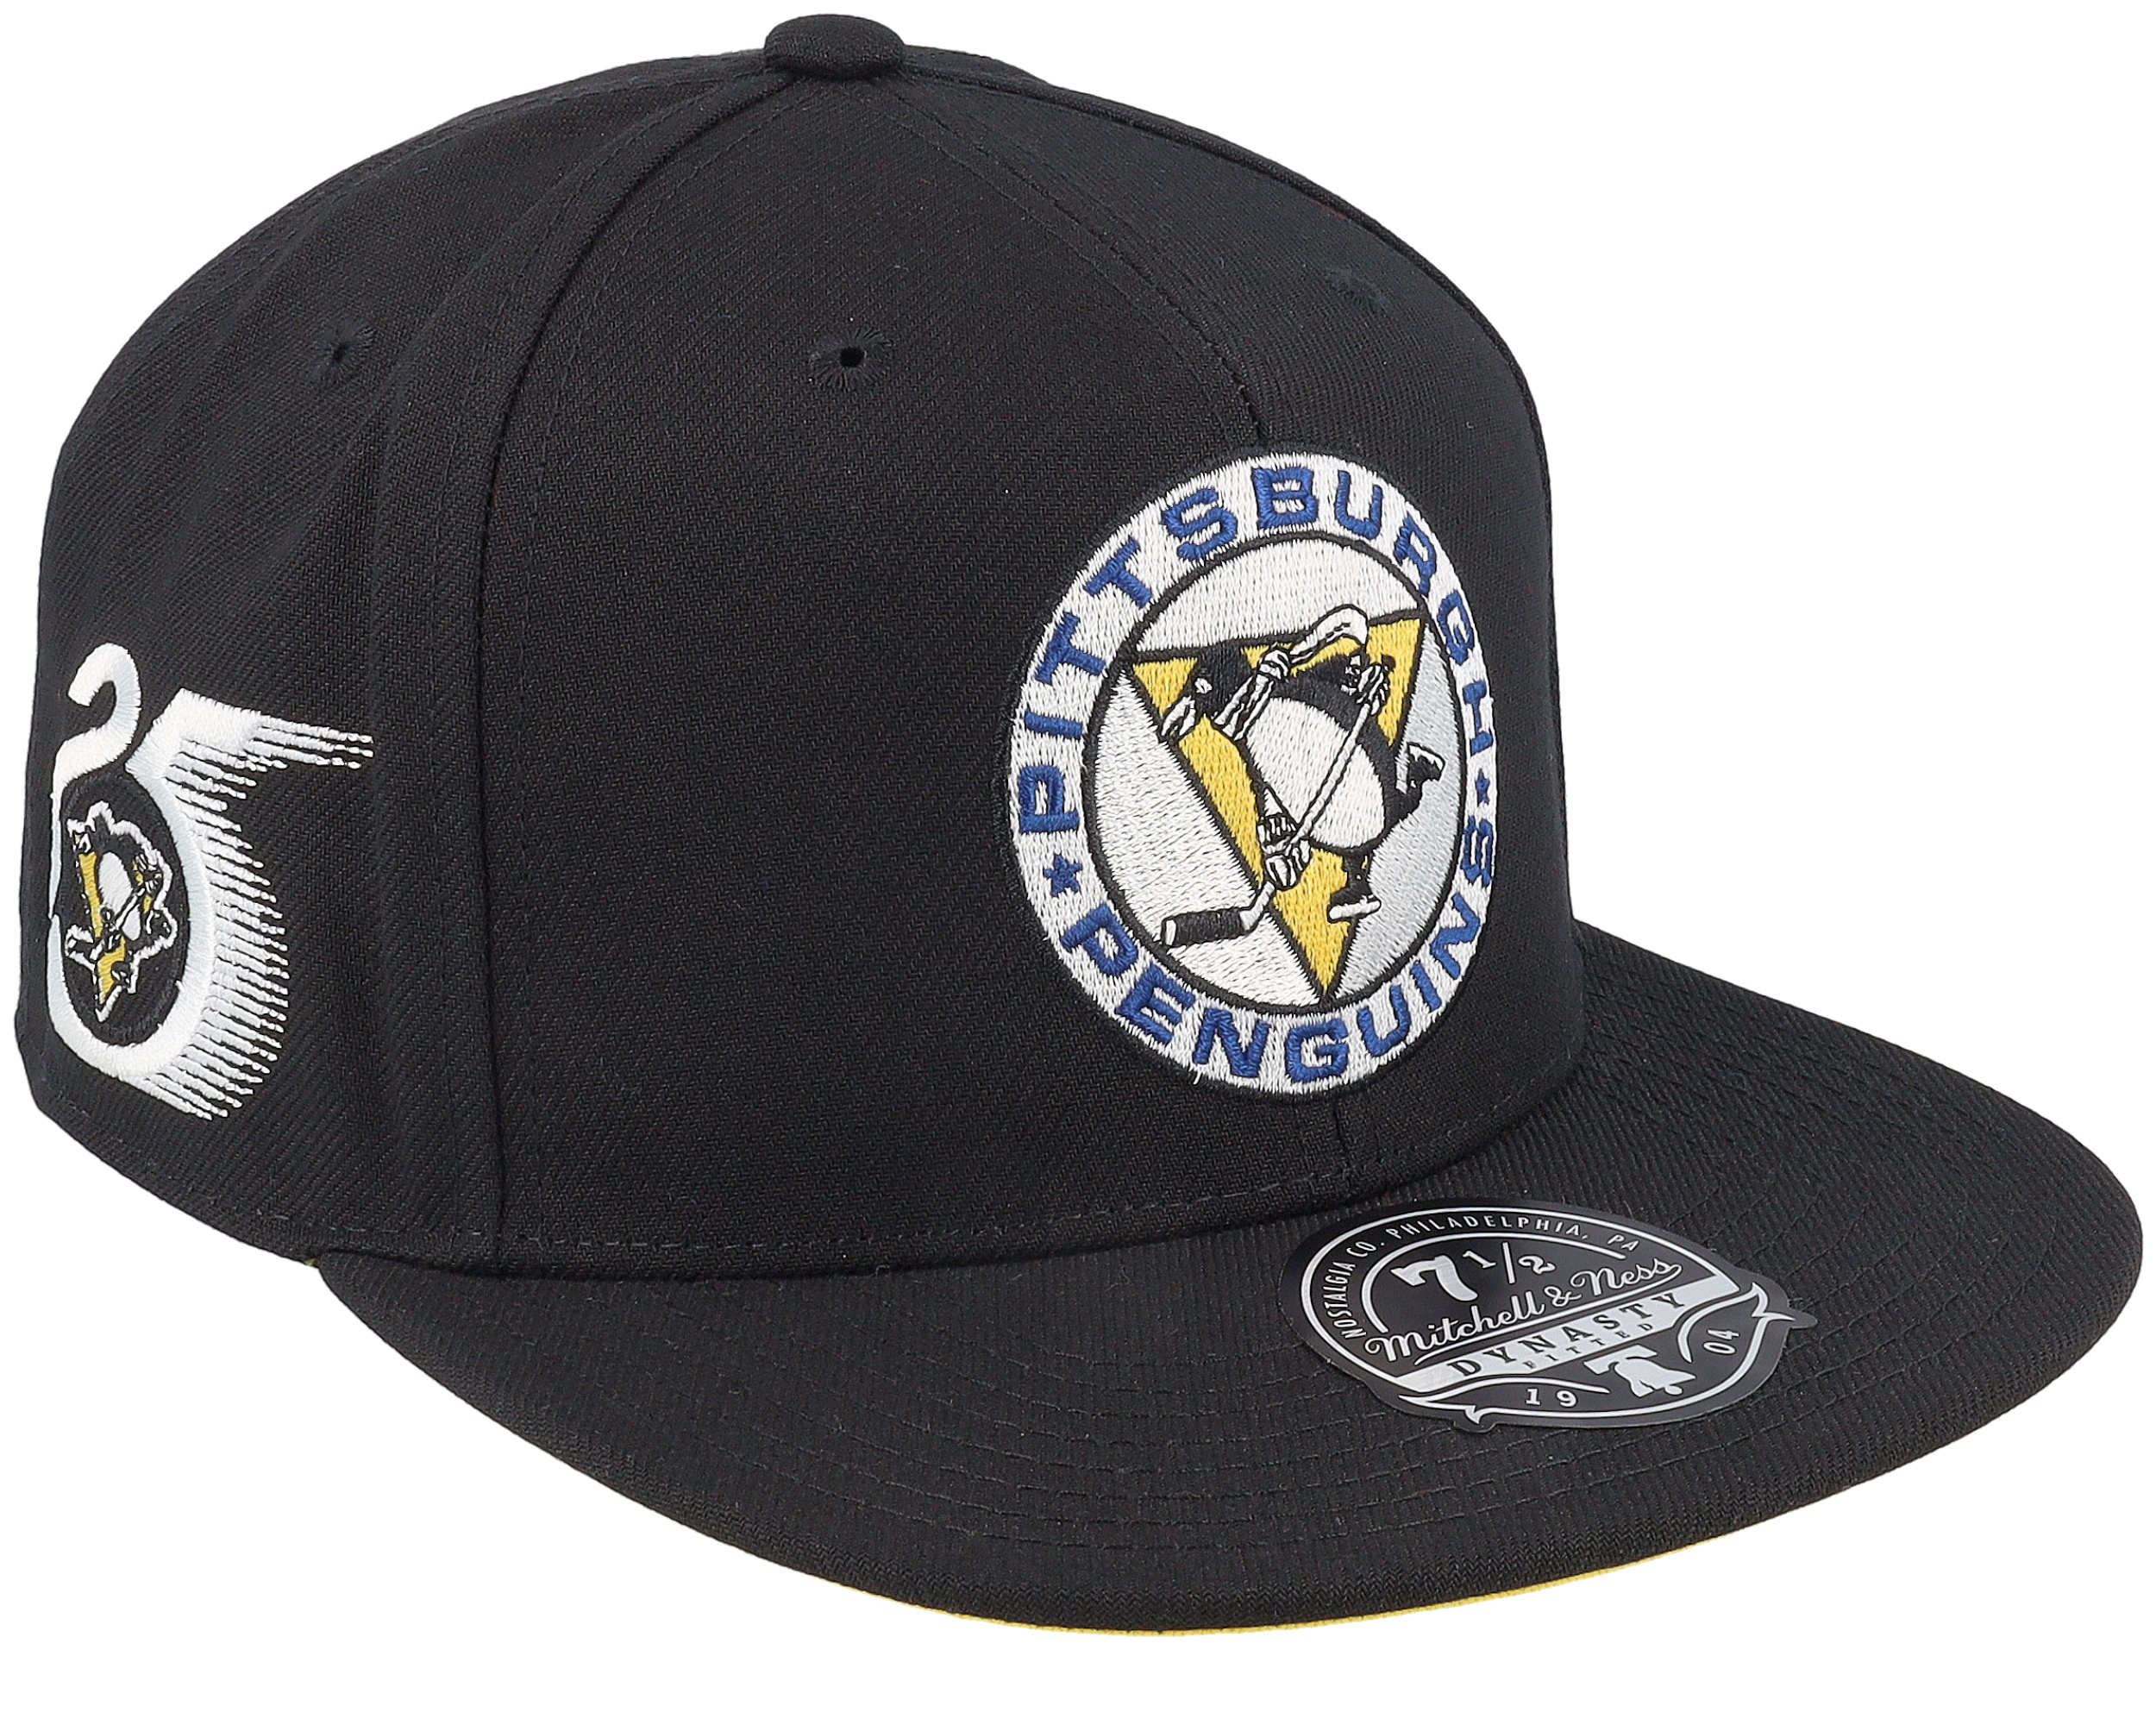 Mitchell & Ness - NHL Black fitted Cap - Pittsburgh Penguins Vintage Black Fitted @ Hatstore